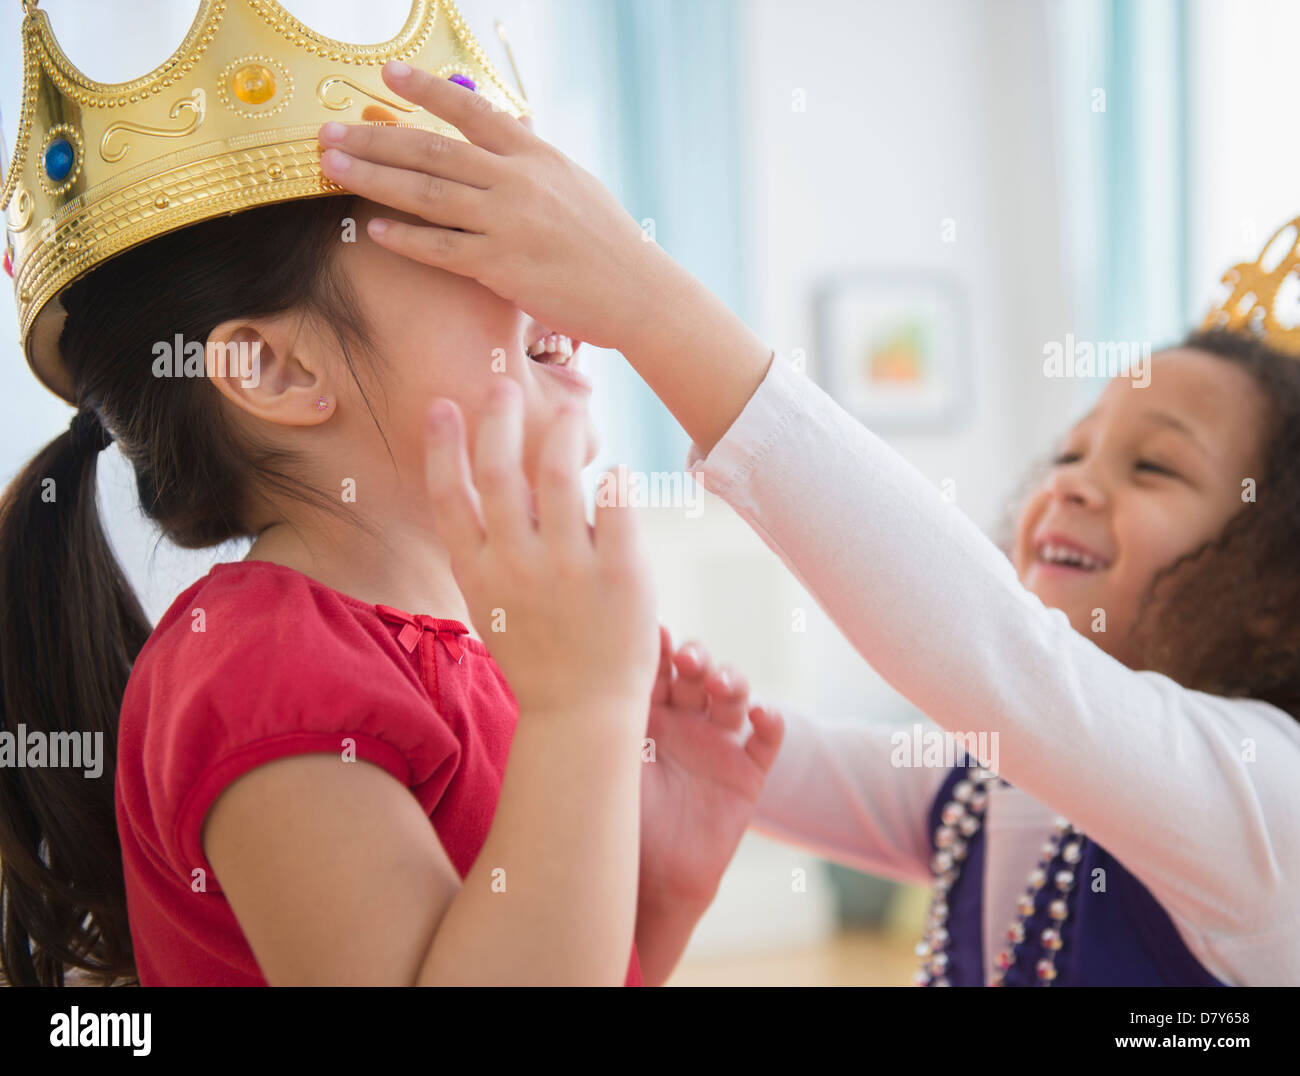 Girls playing dress up together Stock Photo